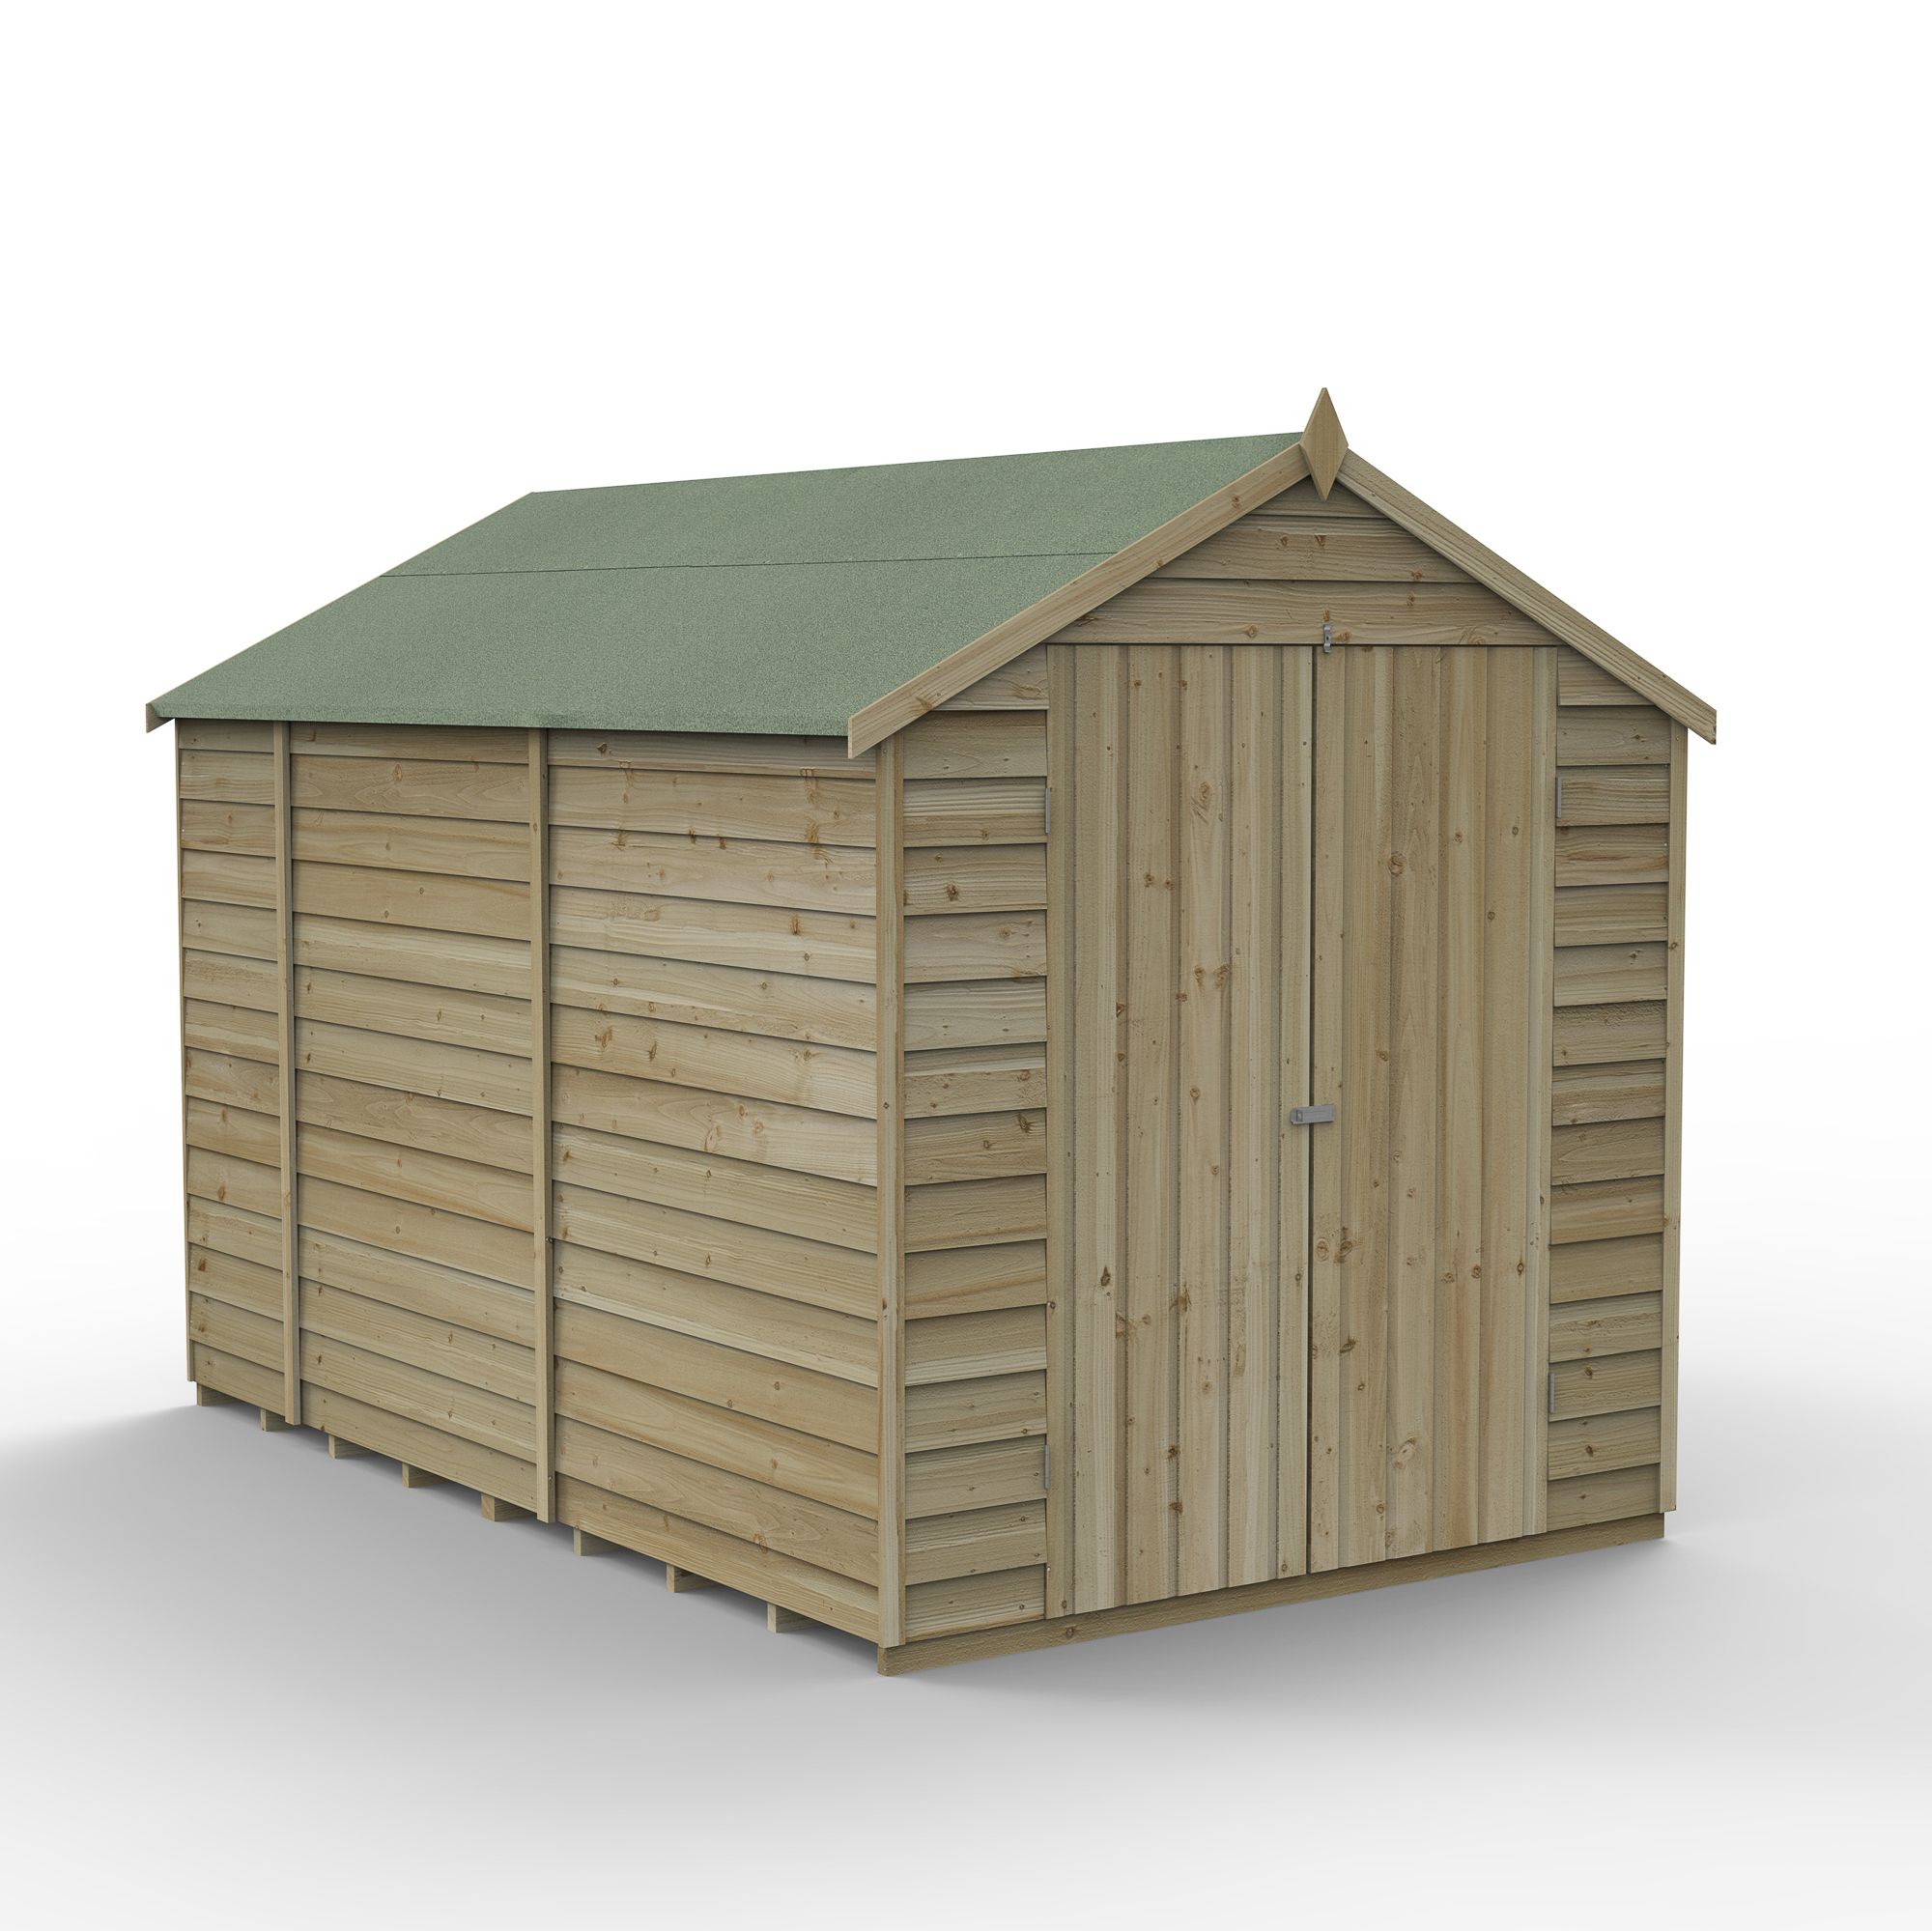 Forest Garden Overlap 10x6 ft Apex Wooden 2 door Shed with floor - Assembly service included